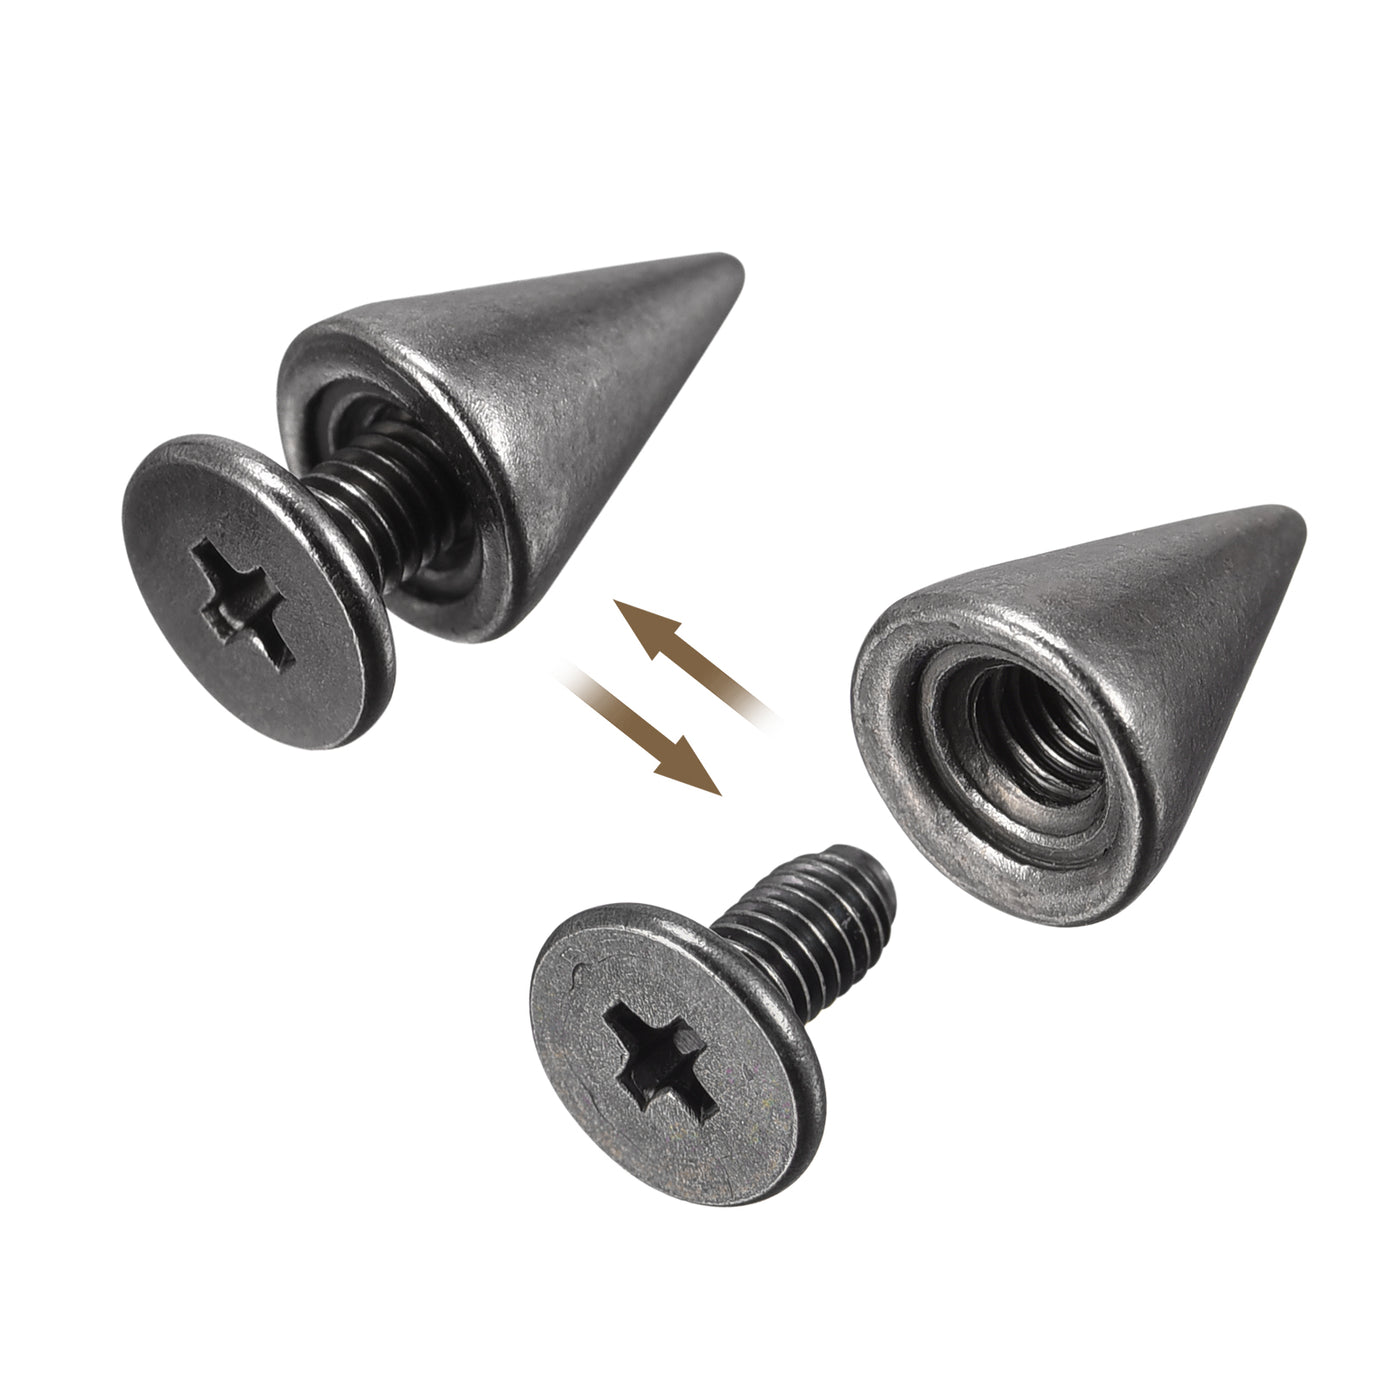 Uxcell Uxcell 7x9mm Screw Back Stud Rivets Spikes Zinc Alloy for DIY Dark Gray 20 Sets